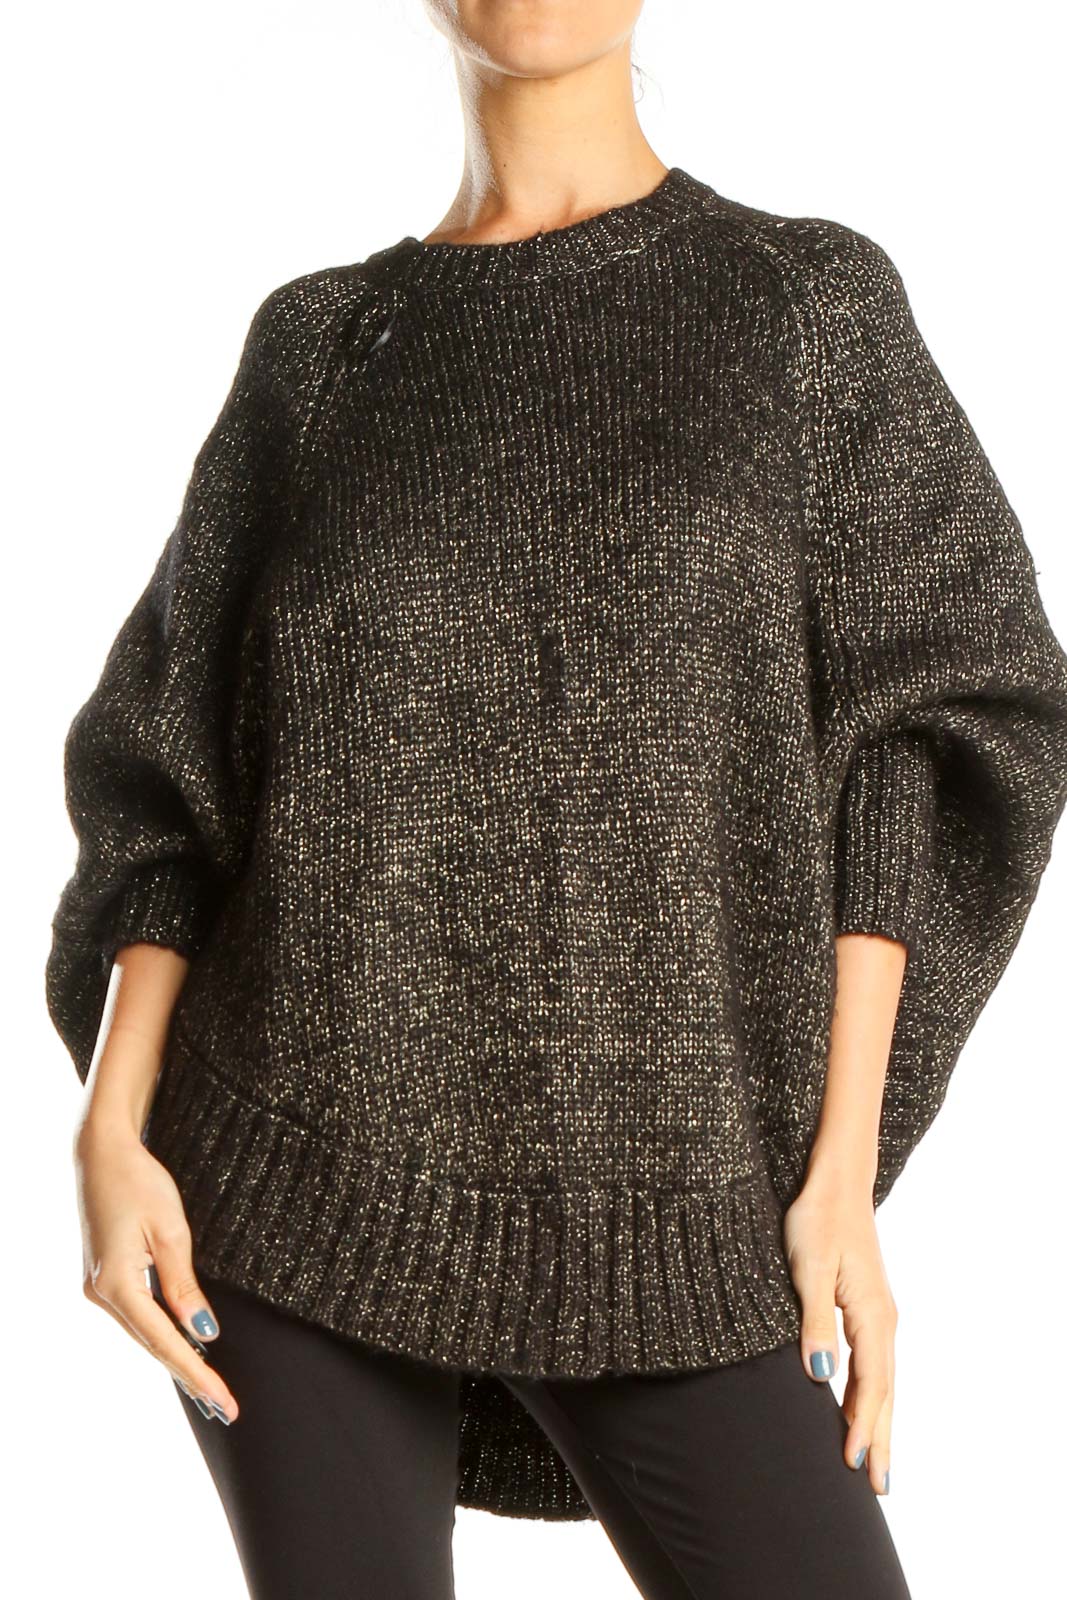 Black Gold Shimmer Party Sweater Front